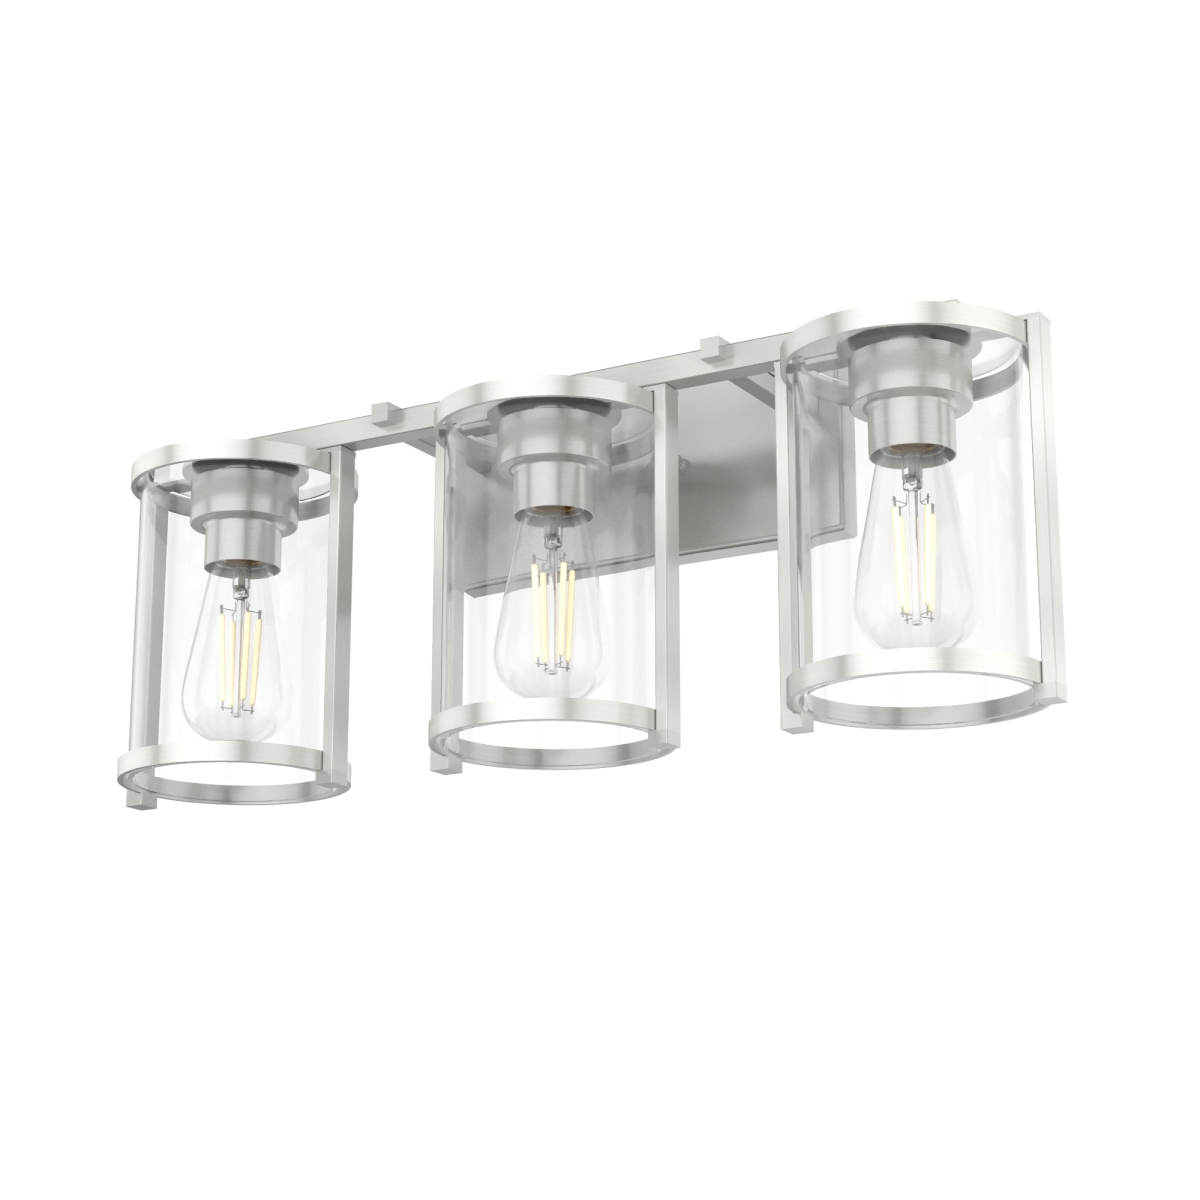 Picture of Hunter 48007 10.25 in. Astwood Brushed Nickel with Clear Glass 3 Light Bathroom Vanity Wall Light Fixture